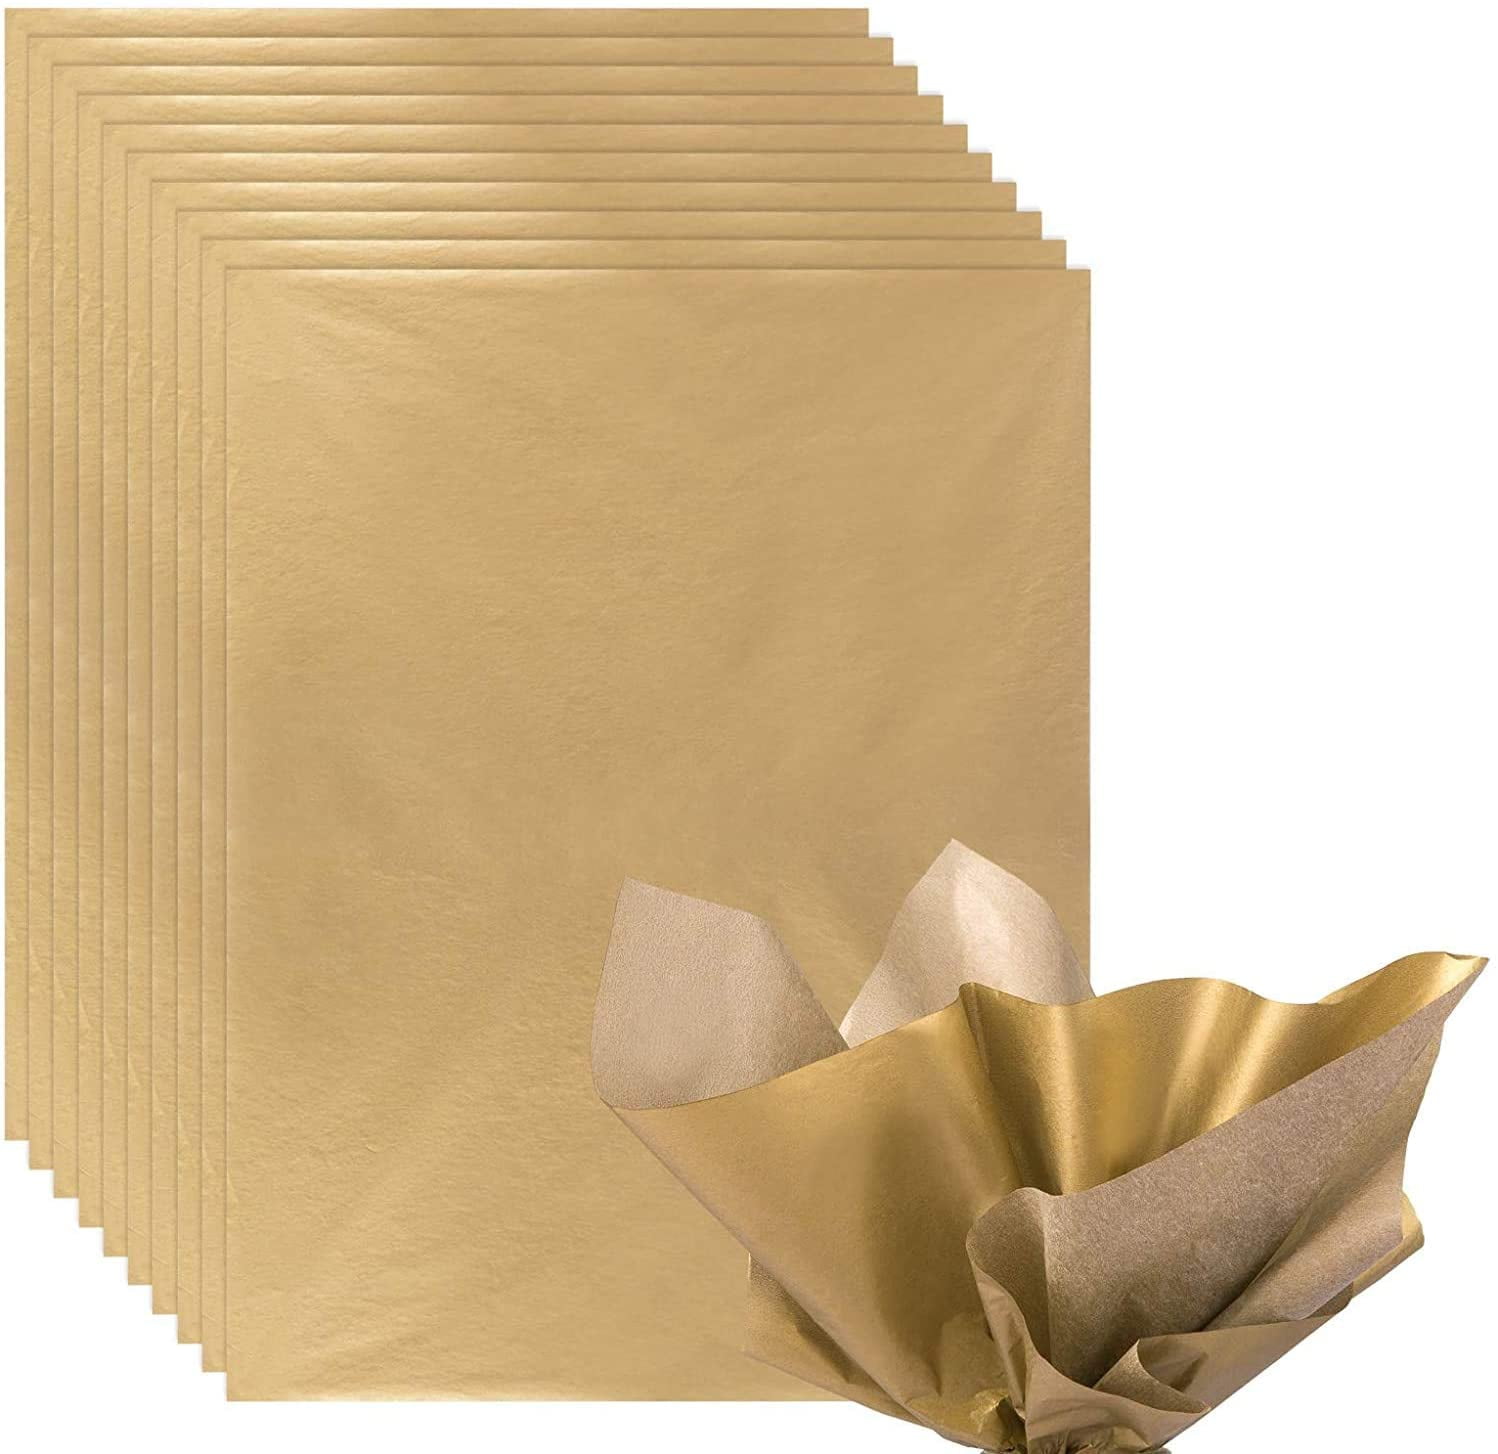 Glitter Glam Gold 76-3842 The Gift Wrap Company 8' Gift Wrap Roll 